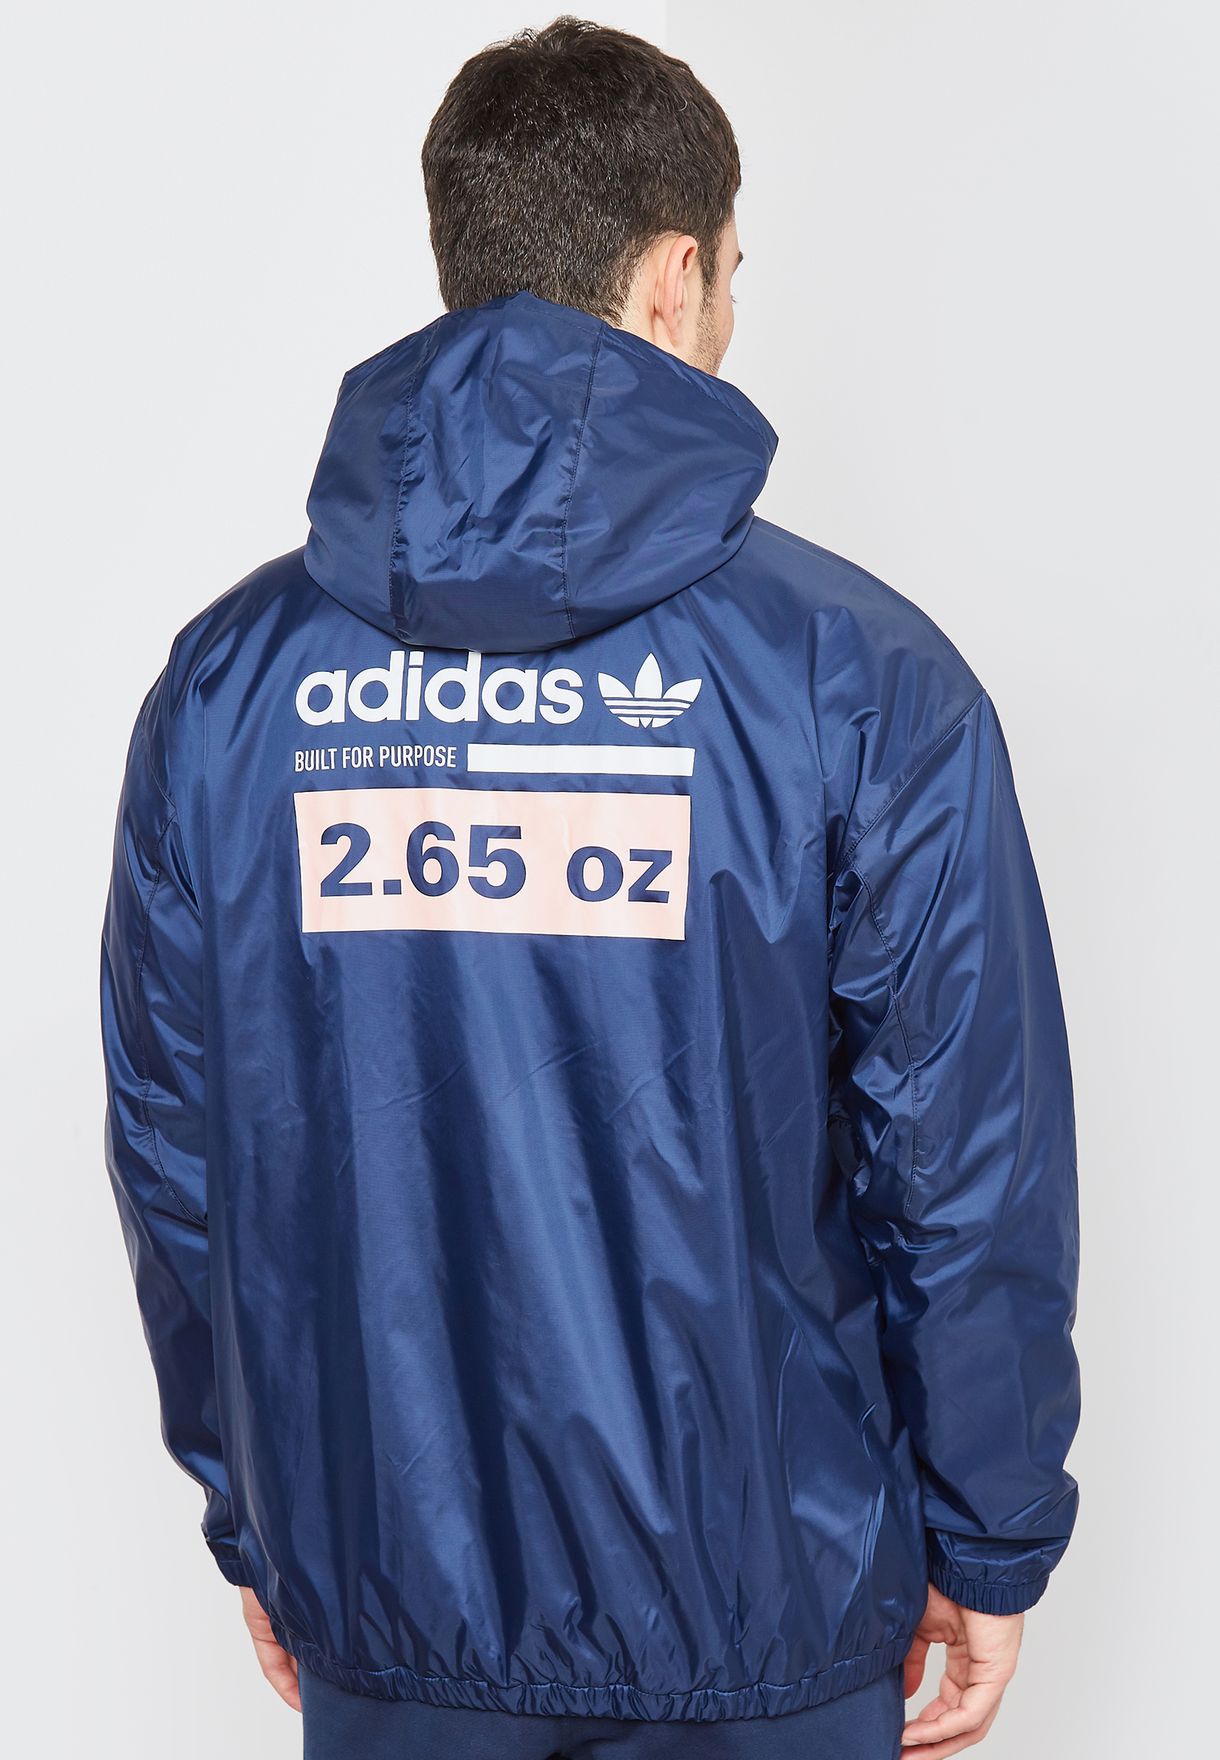 adidas built for purpose jacket